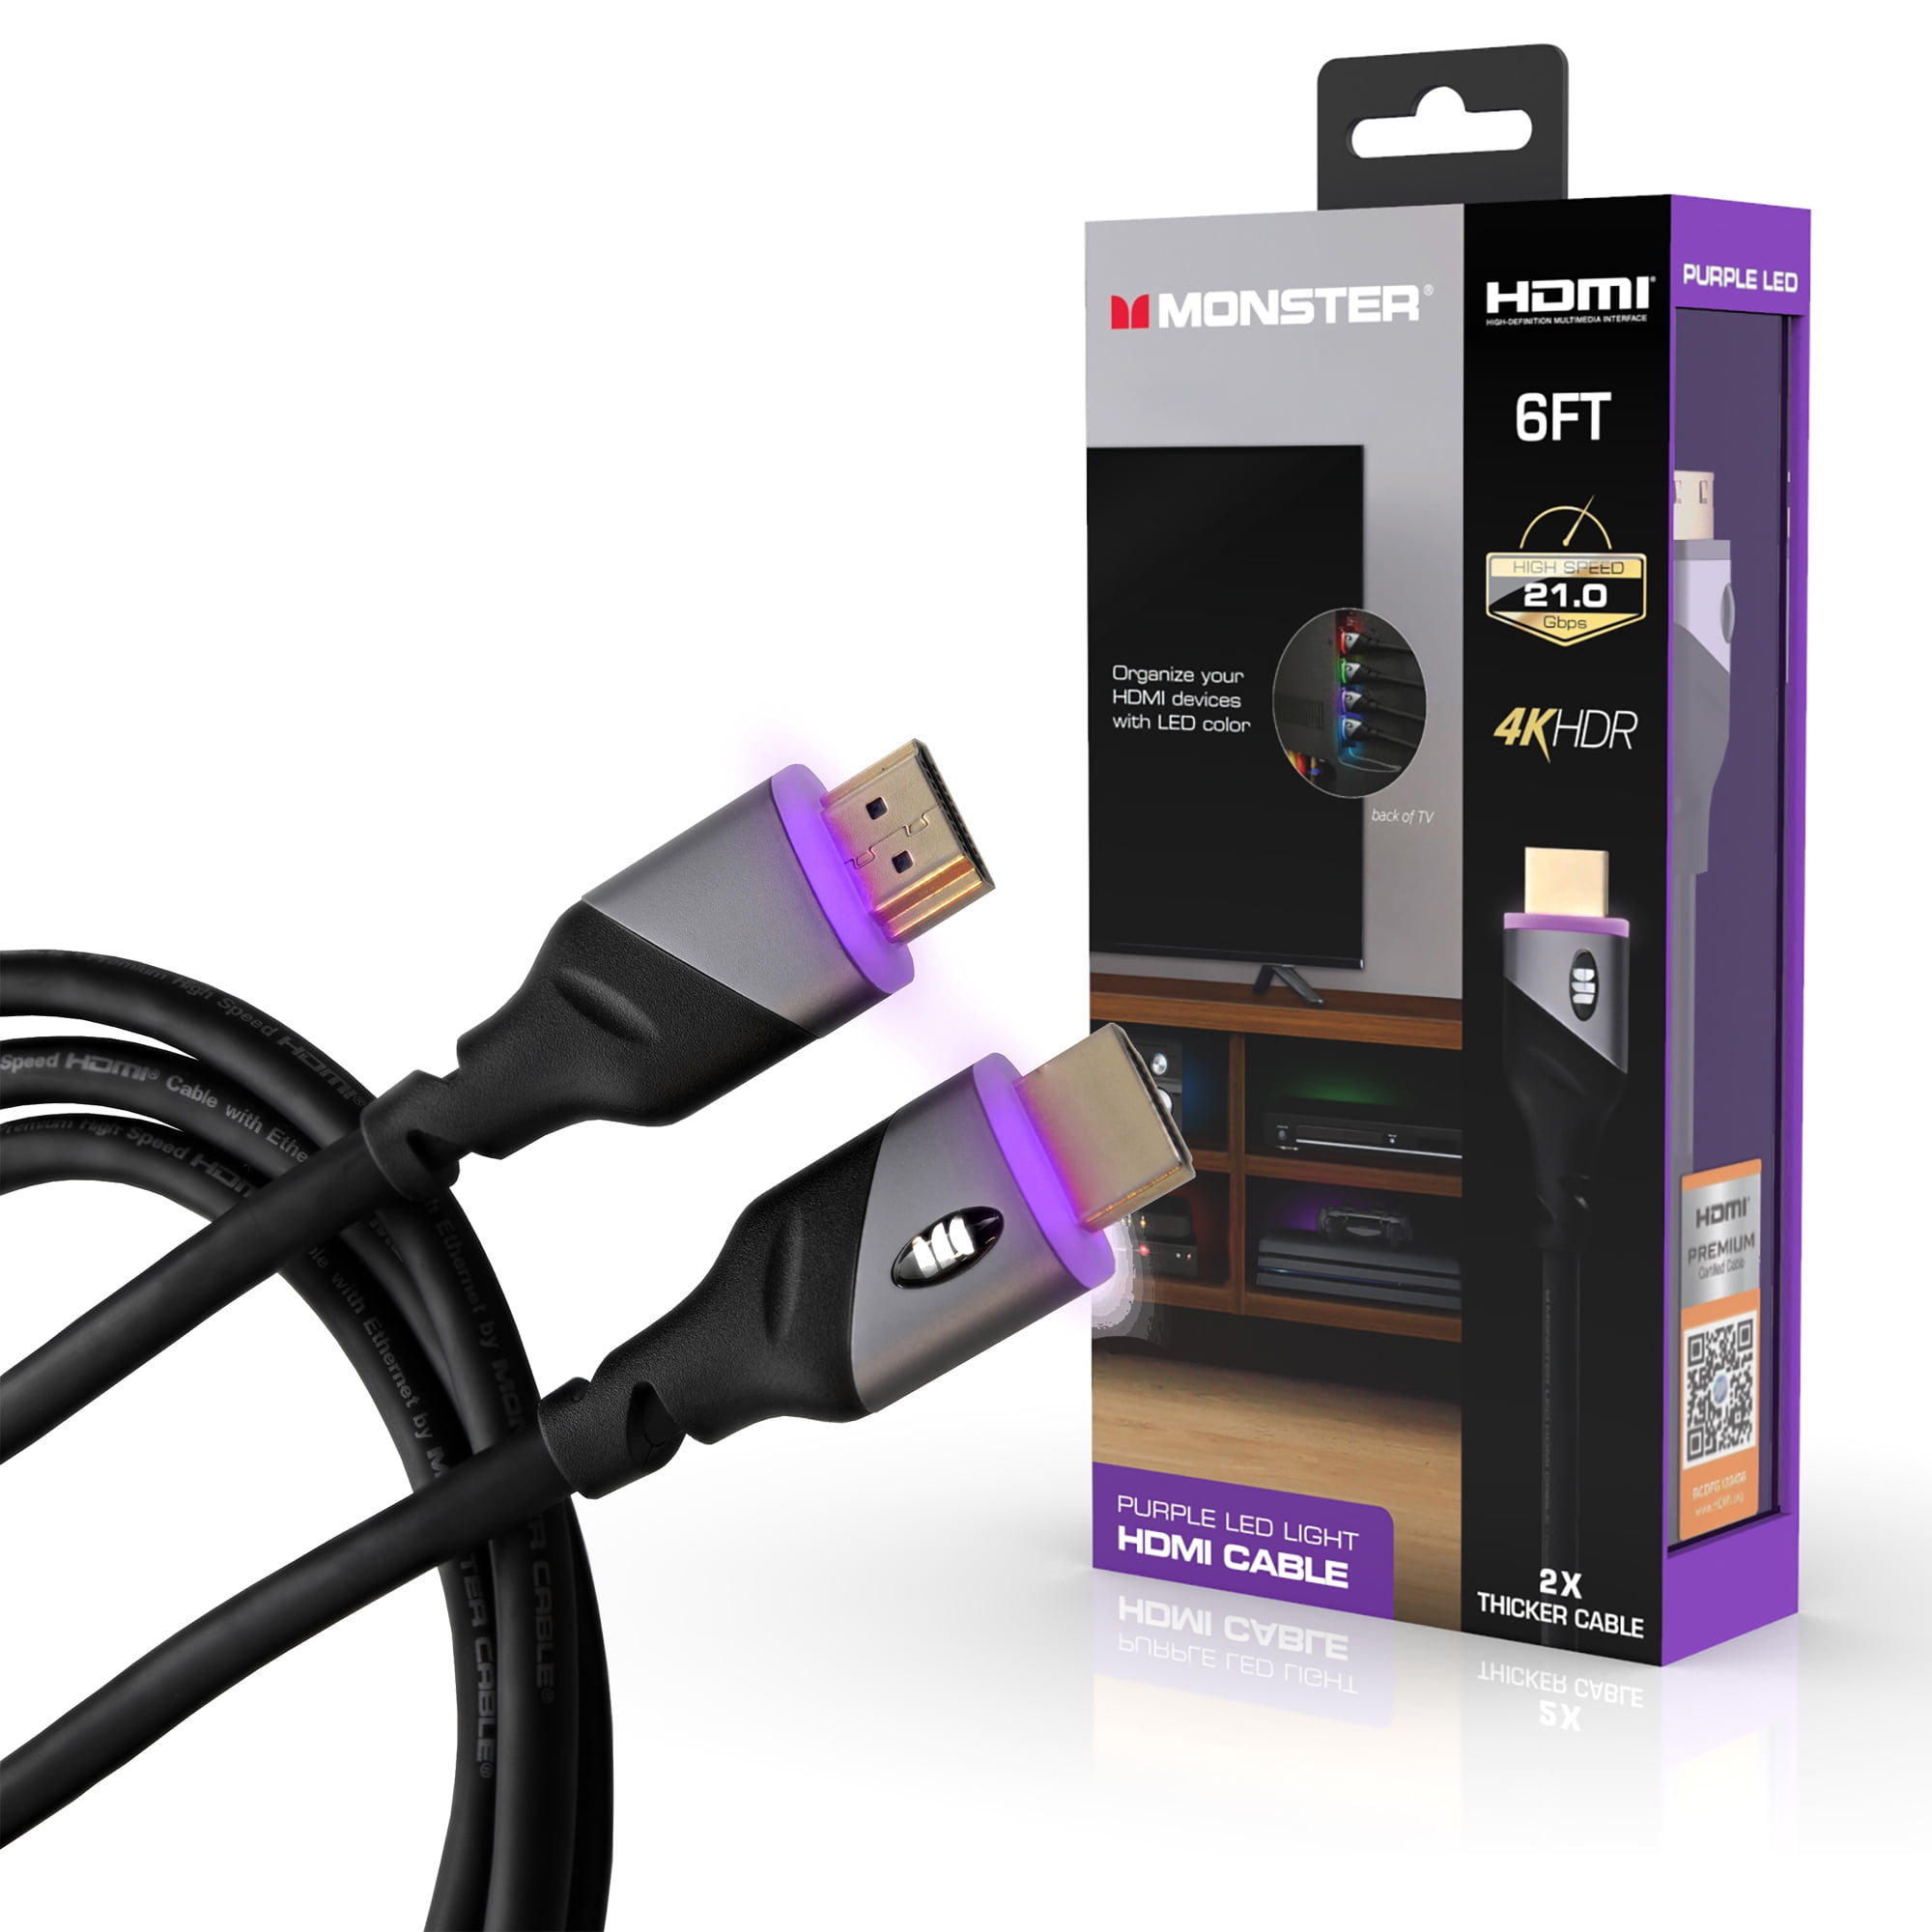 High Speed Cable Mini HDMI to HDMI Male / Male 5 m Black - HDMI Cables -  Multimedia Cables - Cables and Sockets